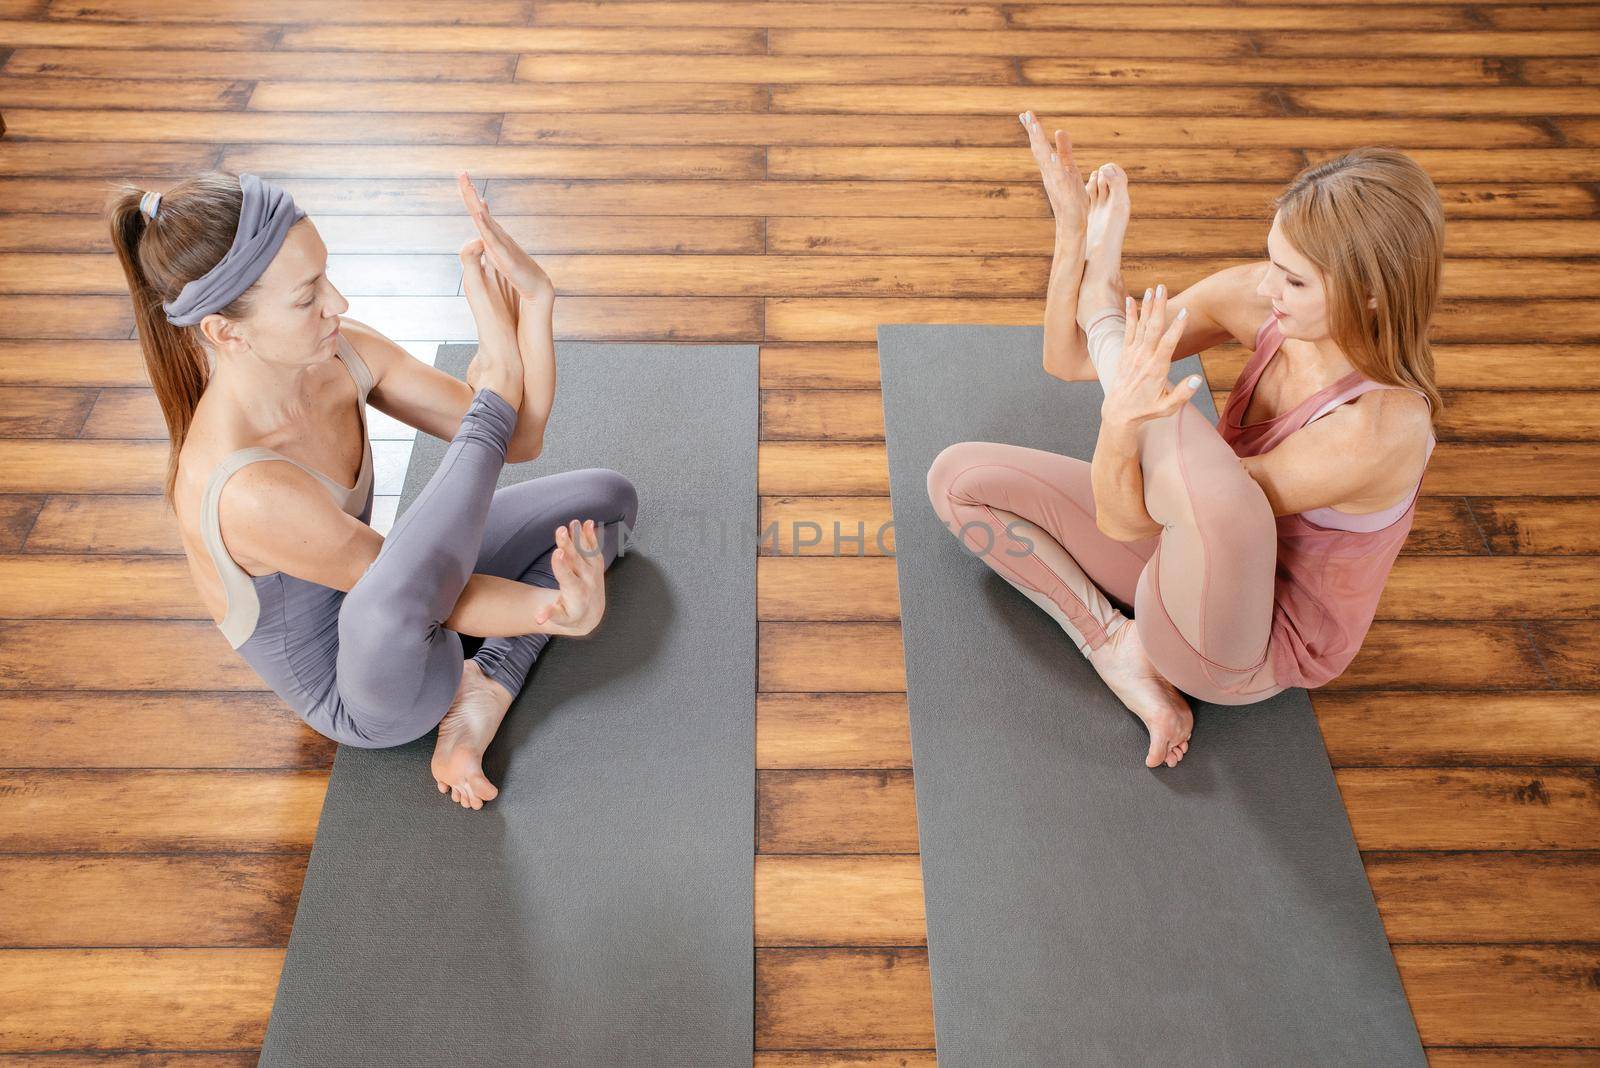 Two mature women stretching on mats in yoga studio. Frienship and sport concept by Mariakray